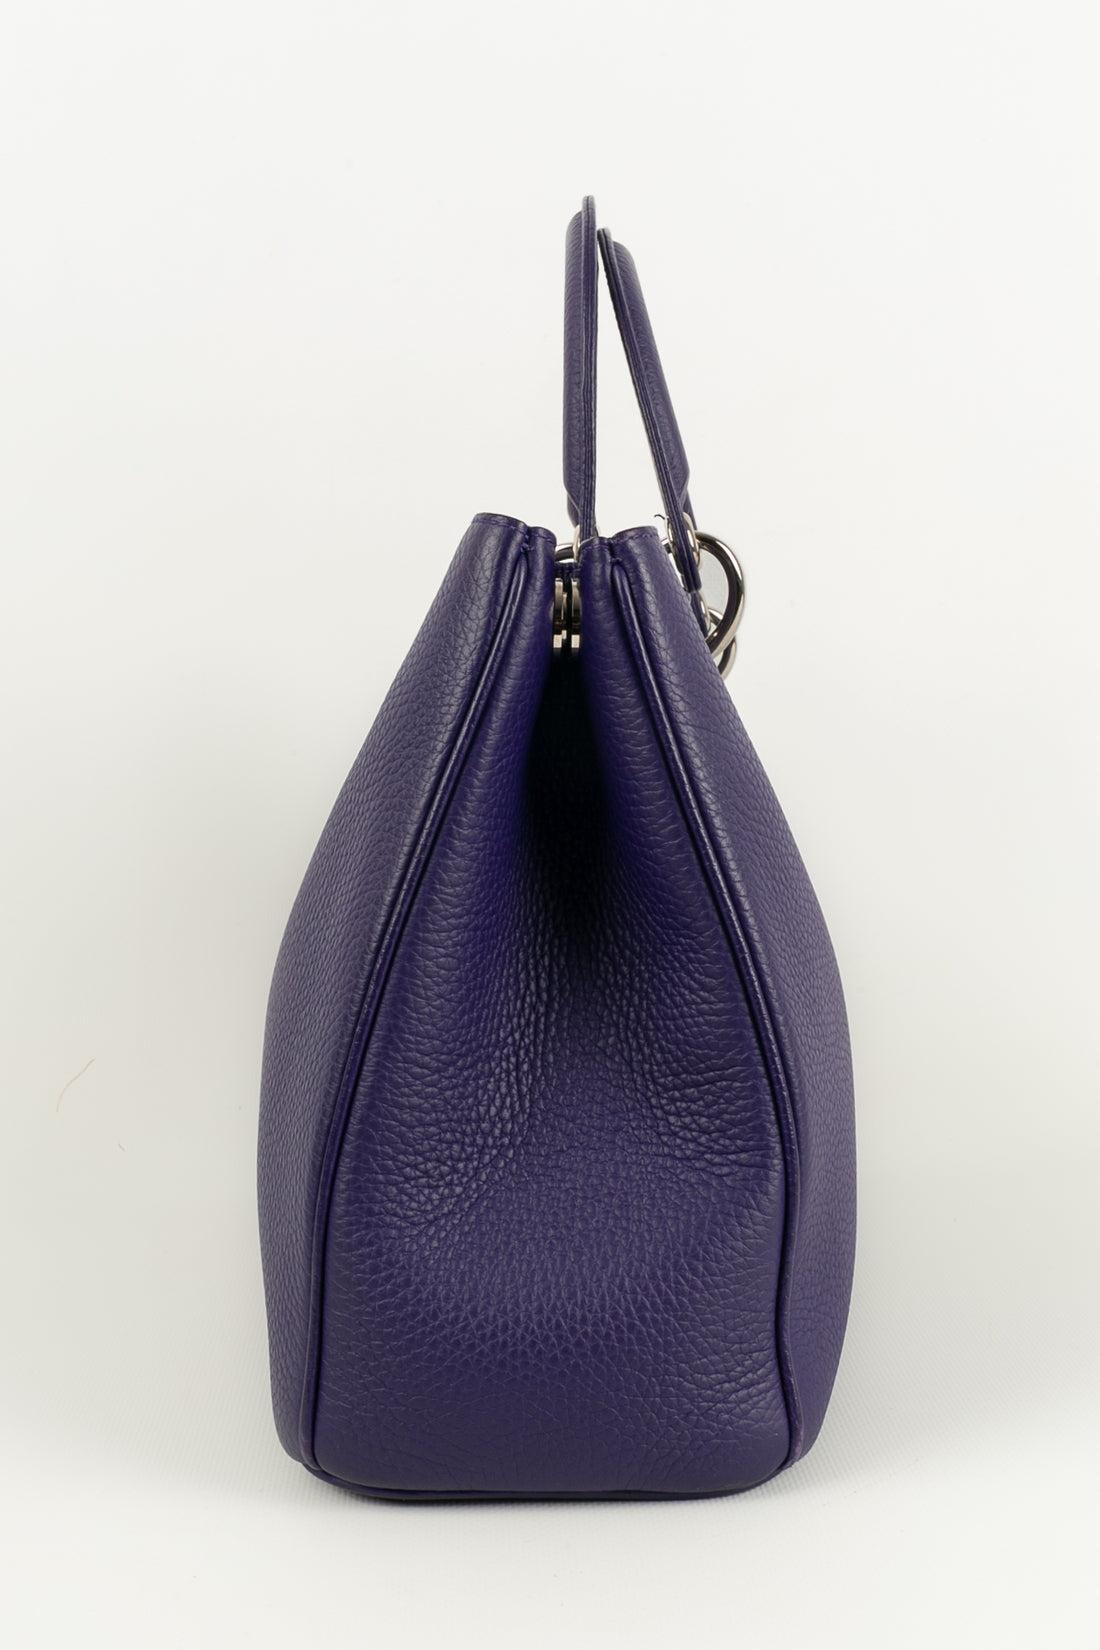 Dior - Purple grained leather bag 'Diorissimo' model and silver metal attributes.

Additional information: 

Dimensions: Height: 22 cm, Length: 31 cm, Depth: 11 cm, Handle: 31 cm

Condition: Very good condition

Seller Ref number: S222